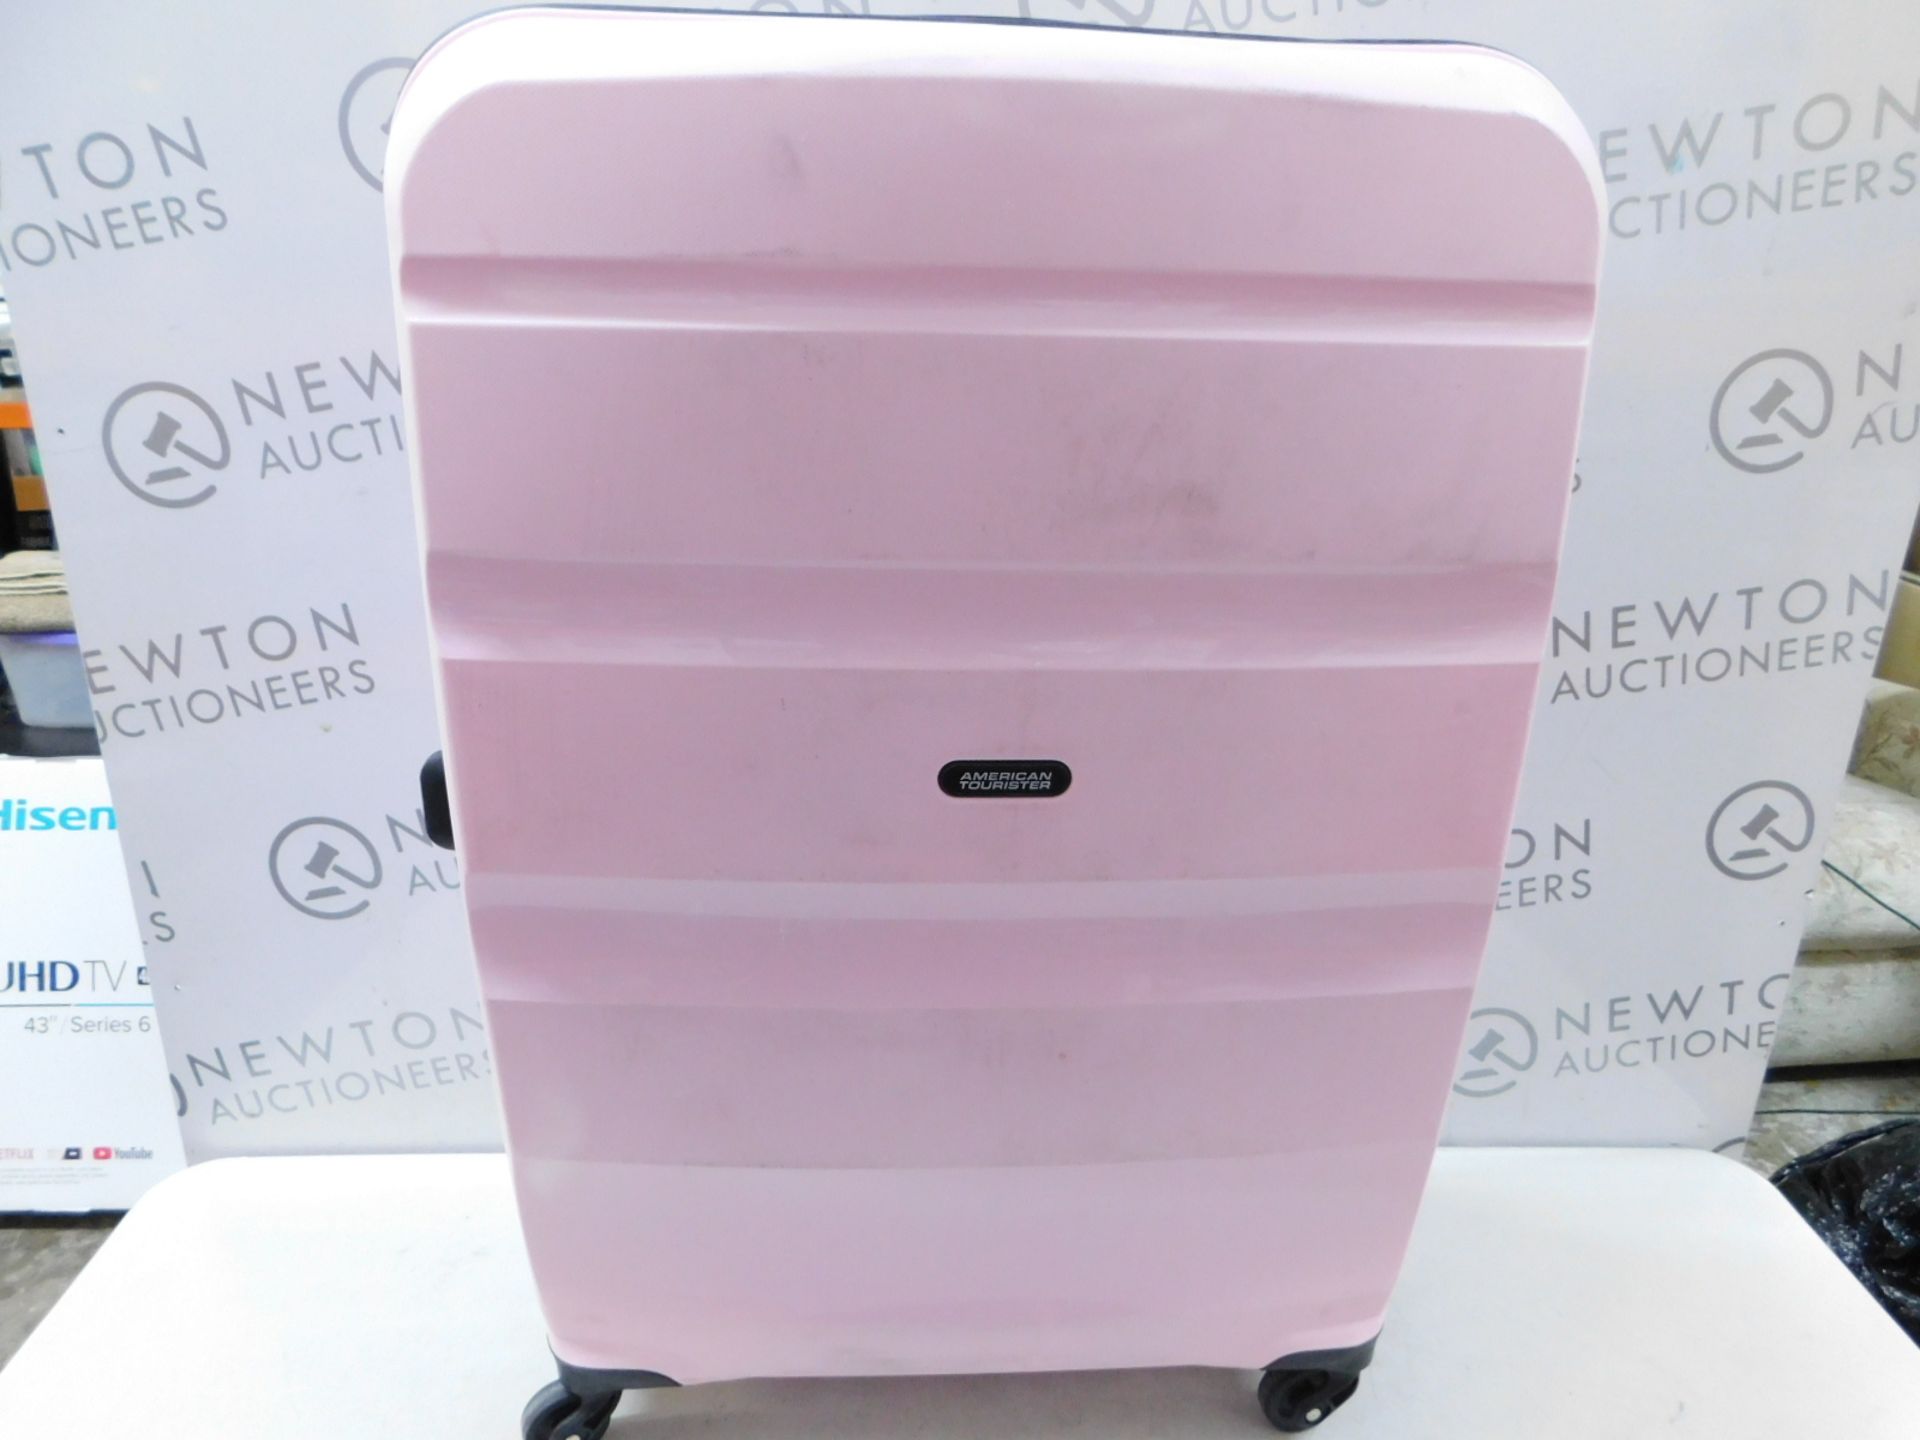 1 AMERICAN TOURISTER COMBI-LOCK COTTON CANDY PINK HARDSIDE PROTECTION LUGGAGE CASE RRP Â£149.99